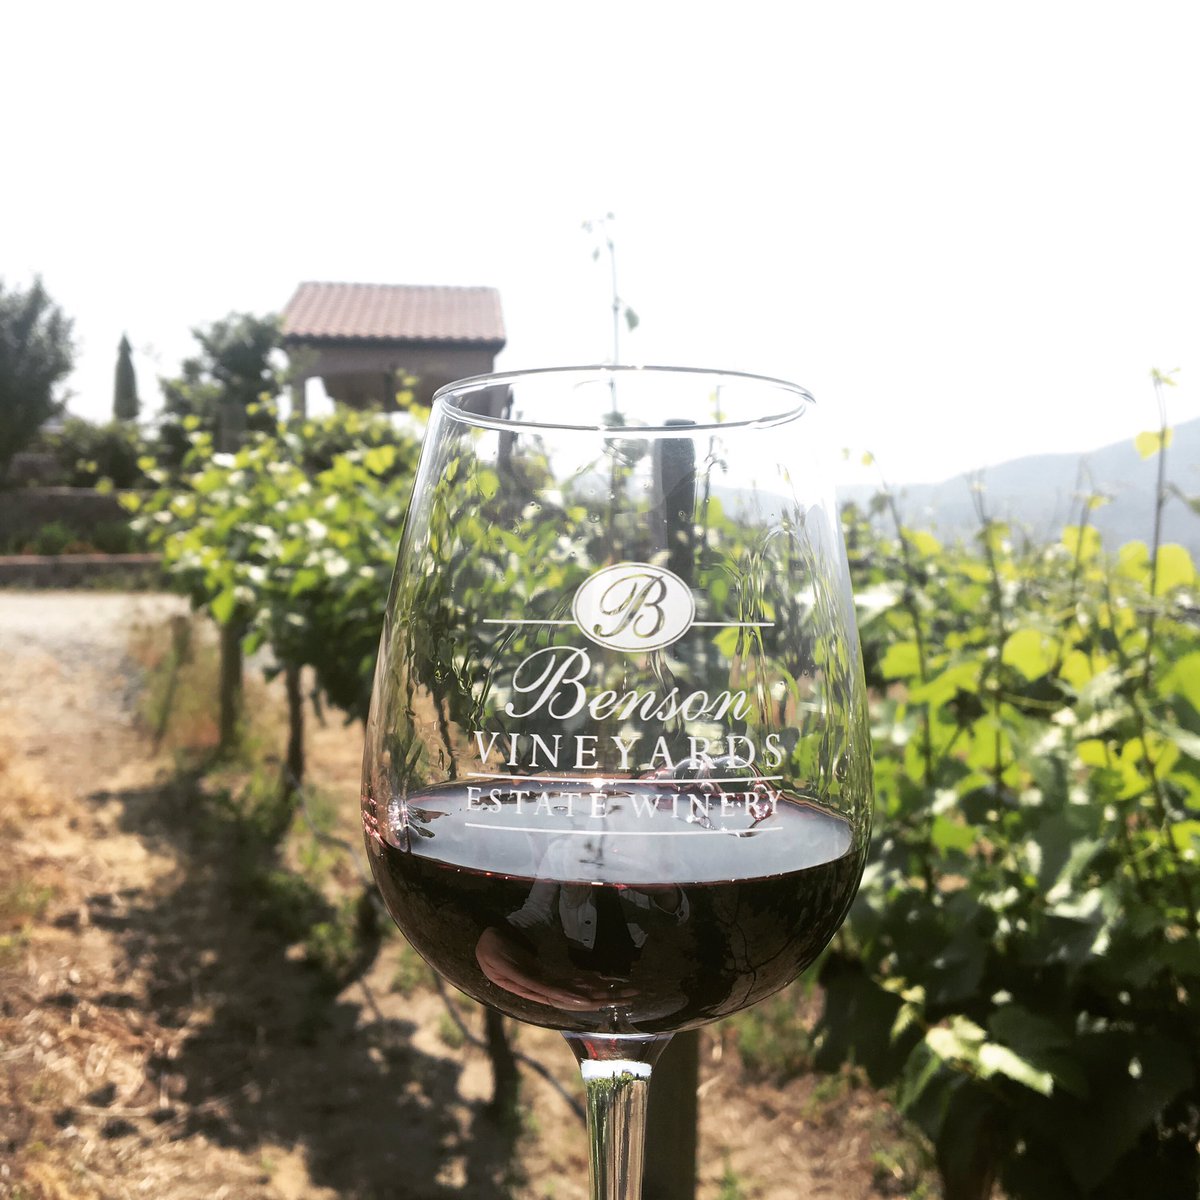 2 LIVE CONCERTS TOMORROW! You won’t want to miss out! First concert is from 1pm-4pm and the second concert is from 6pm-10pm! #bensonvineyards #lakechelan #wawine #pnw #wine #winery #music #concert #celebrate #redwine #redwinelover #washingtongrown #vineyard